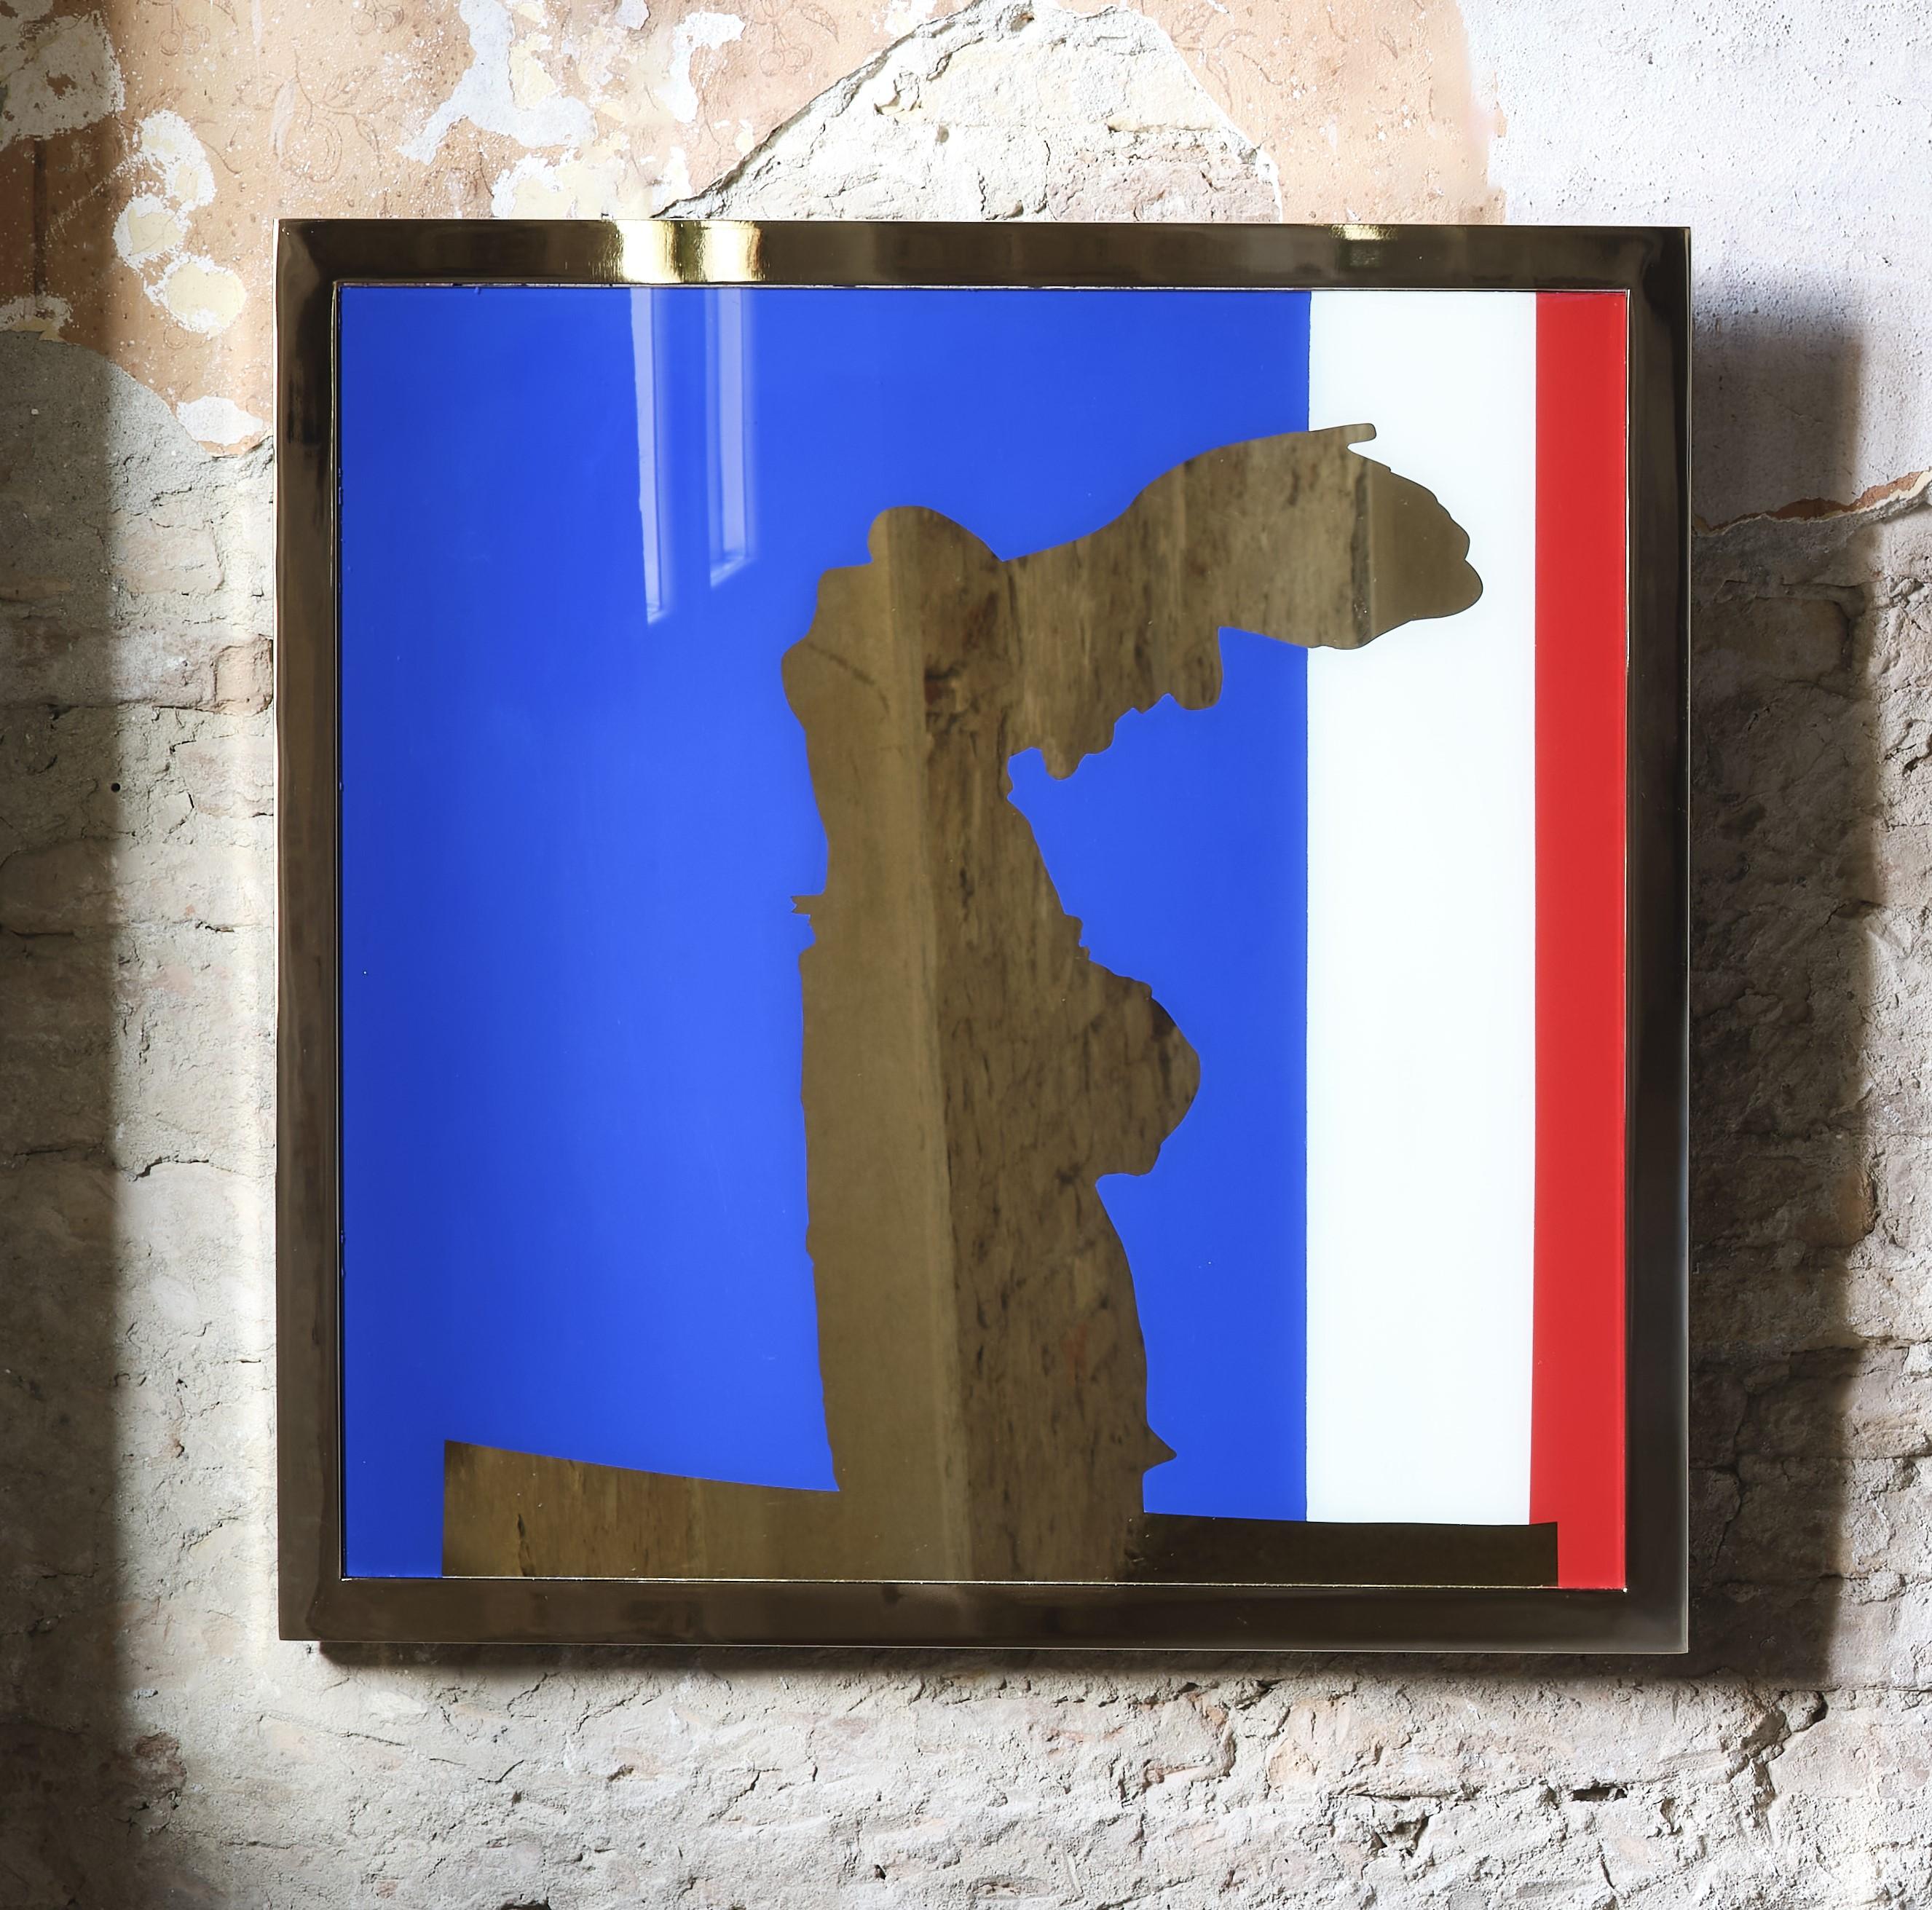 The Nike Of Samothrace, Icon Wall Decoration by Davide Medri
Dimensions: D 10 x W 88 x H 88 cm.
Materials: Golden mirror, metal structure.

Davide Medri was born in Cesena on August 7th 1967 and graduated at the Academy of Fine Arts in Ravenna, the